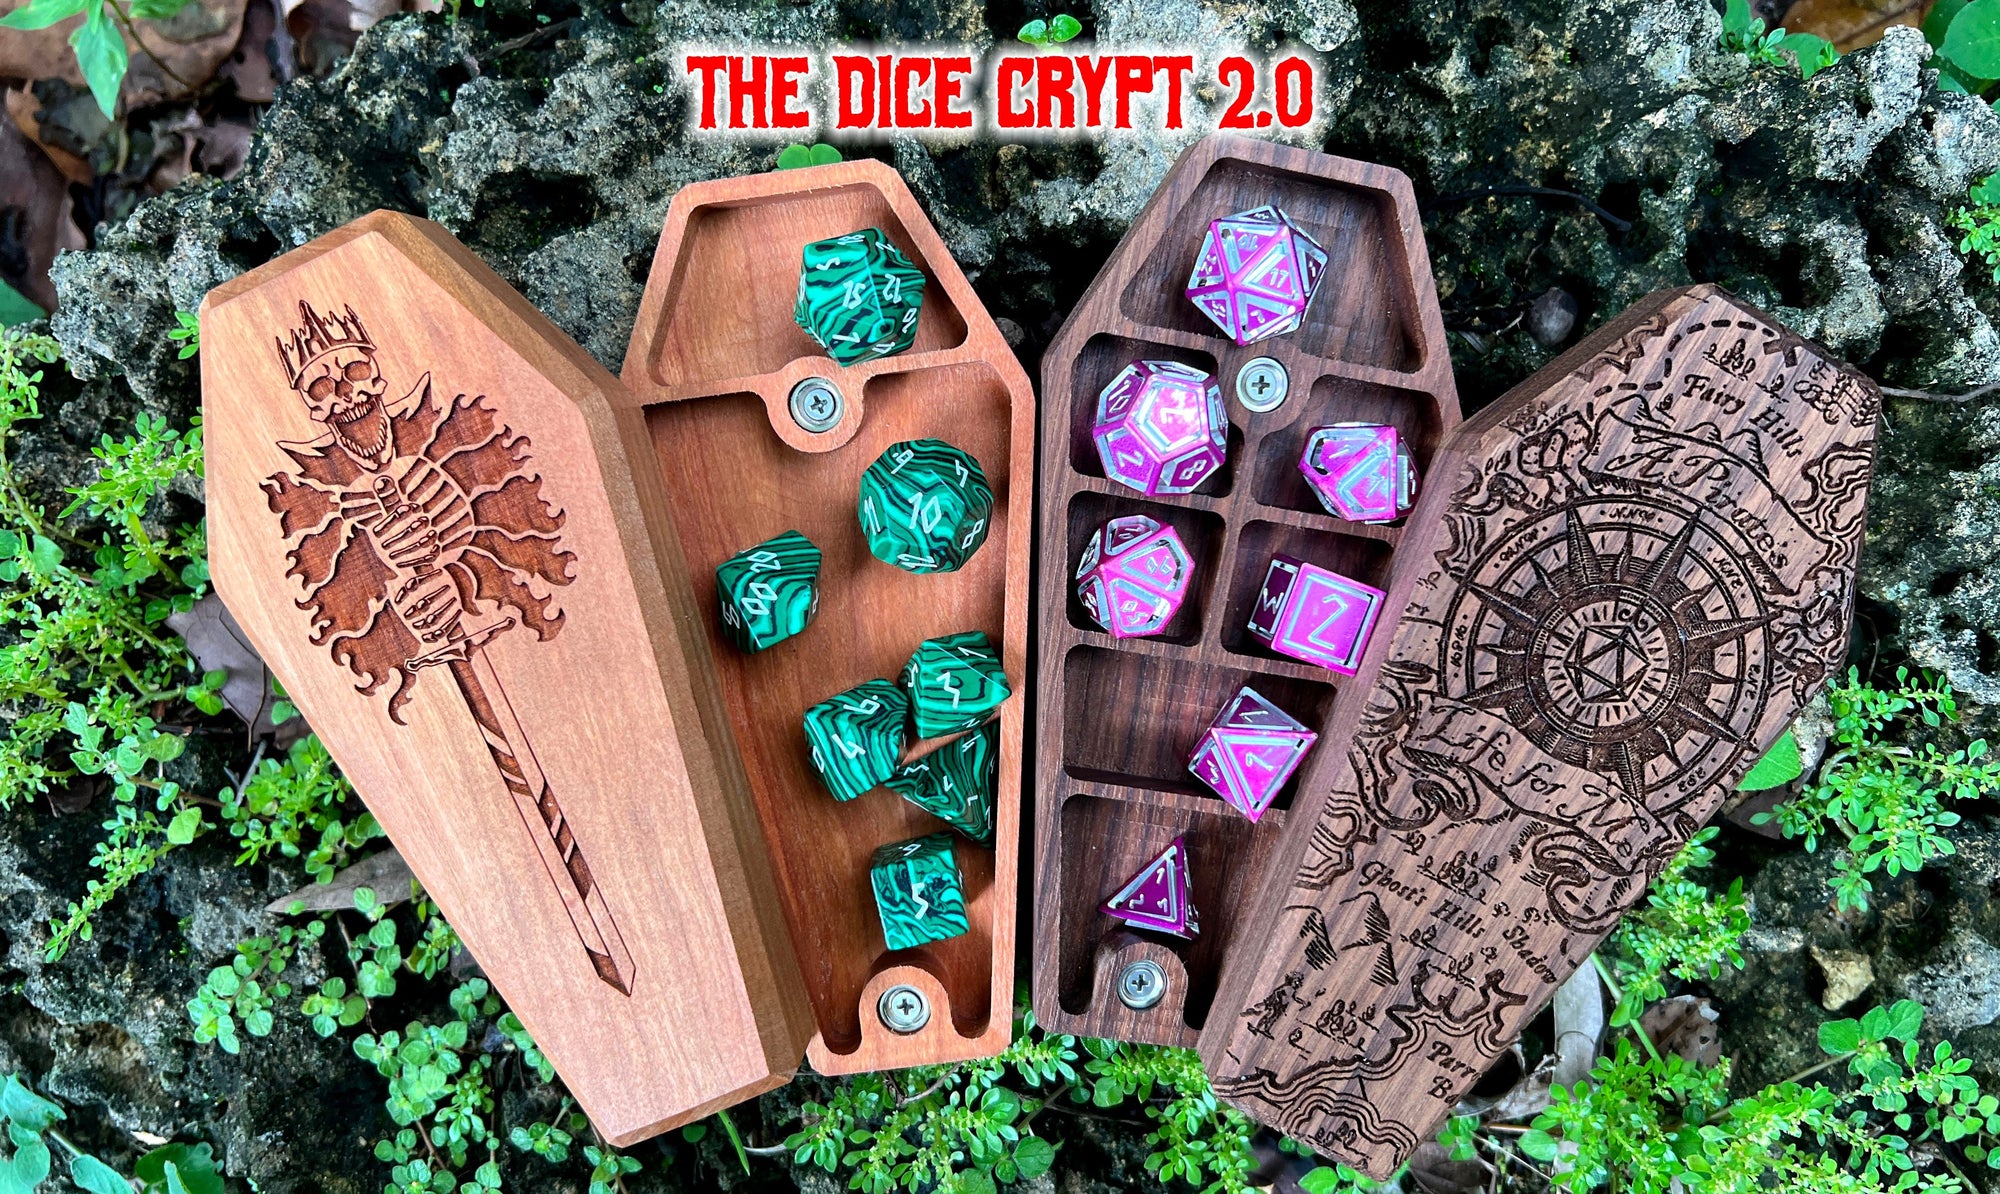 The Dice Crypt® 2.0